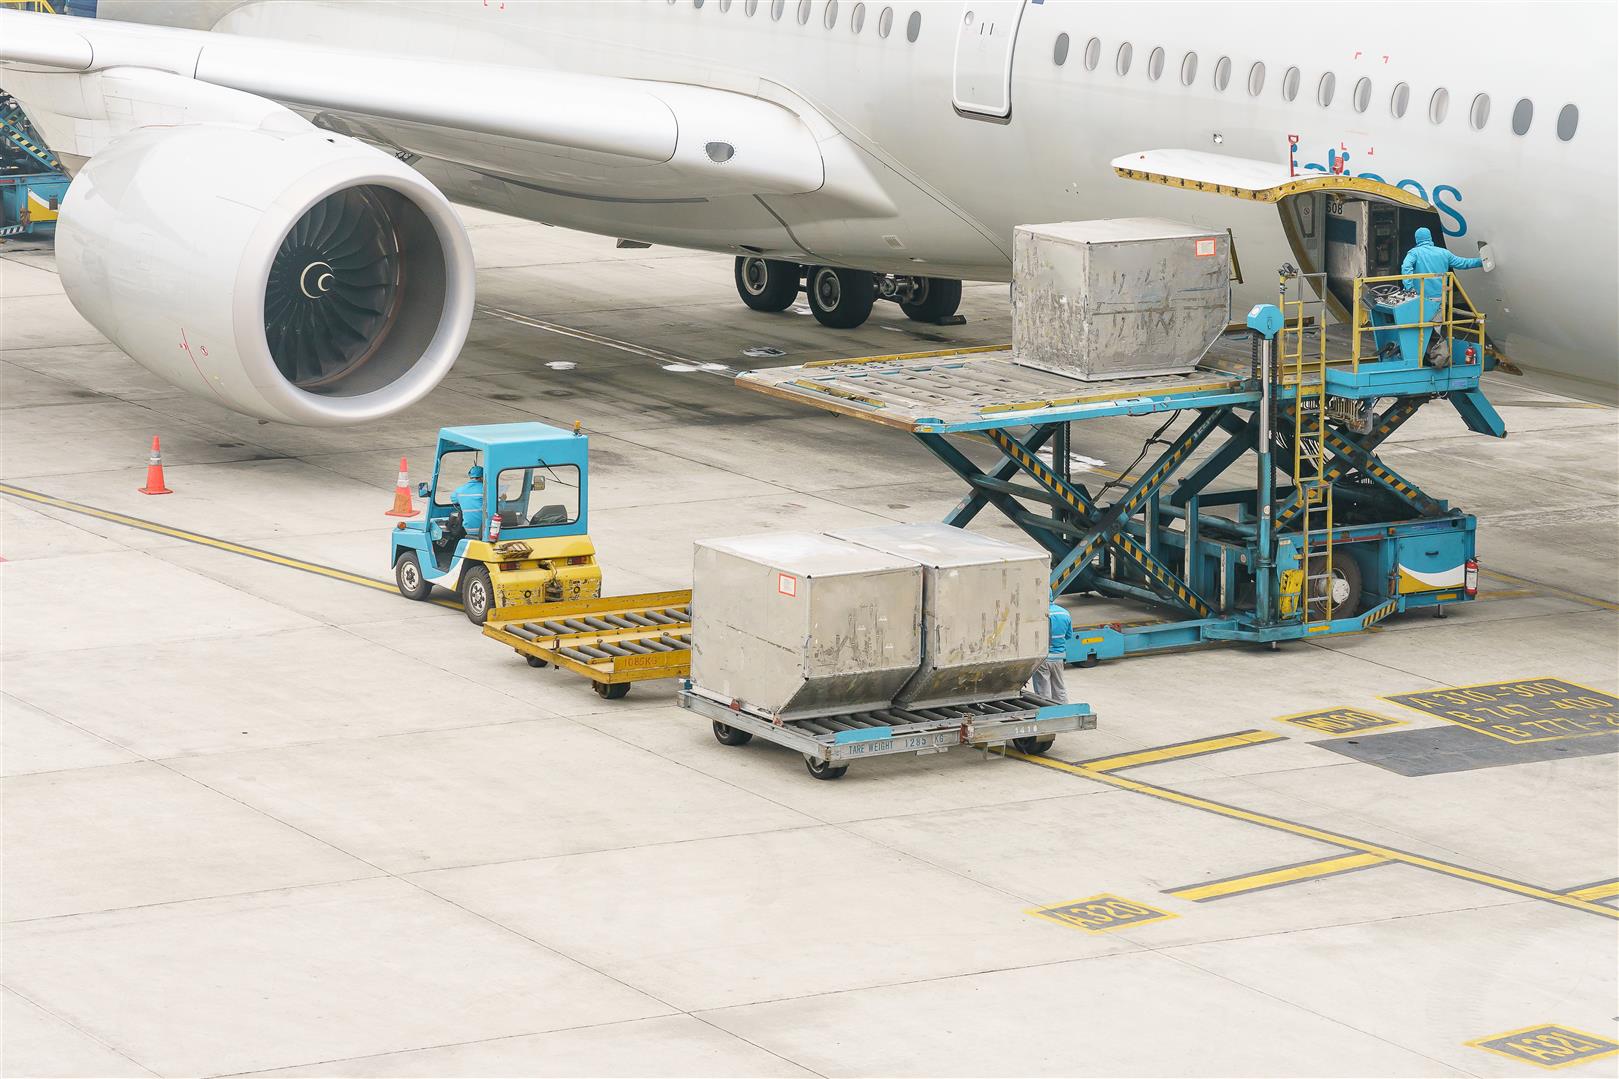 loading-platform-air-freight-aircraft-food-flight-check-services-equipment-ready-before-boarding-airplane.jpg